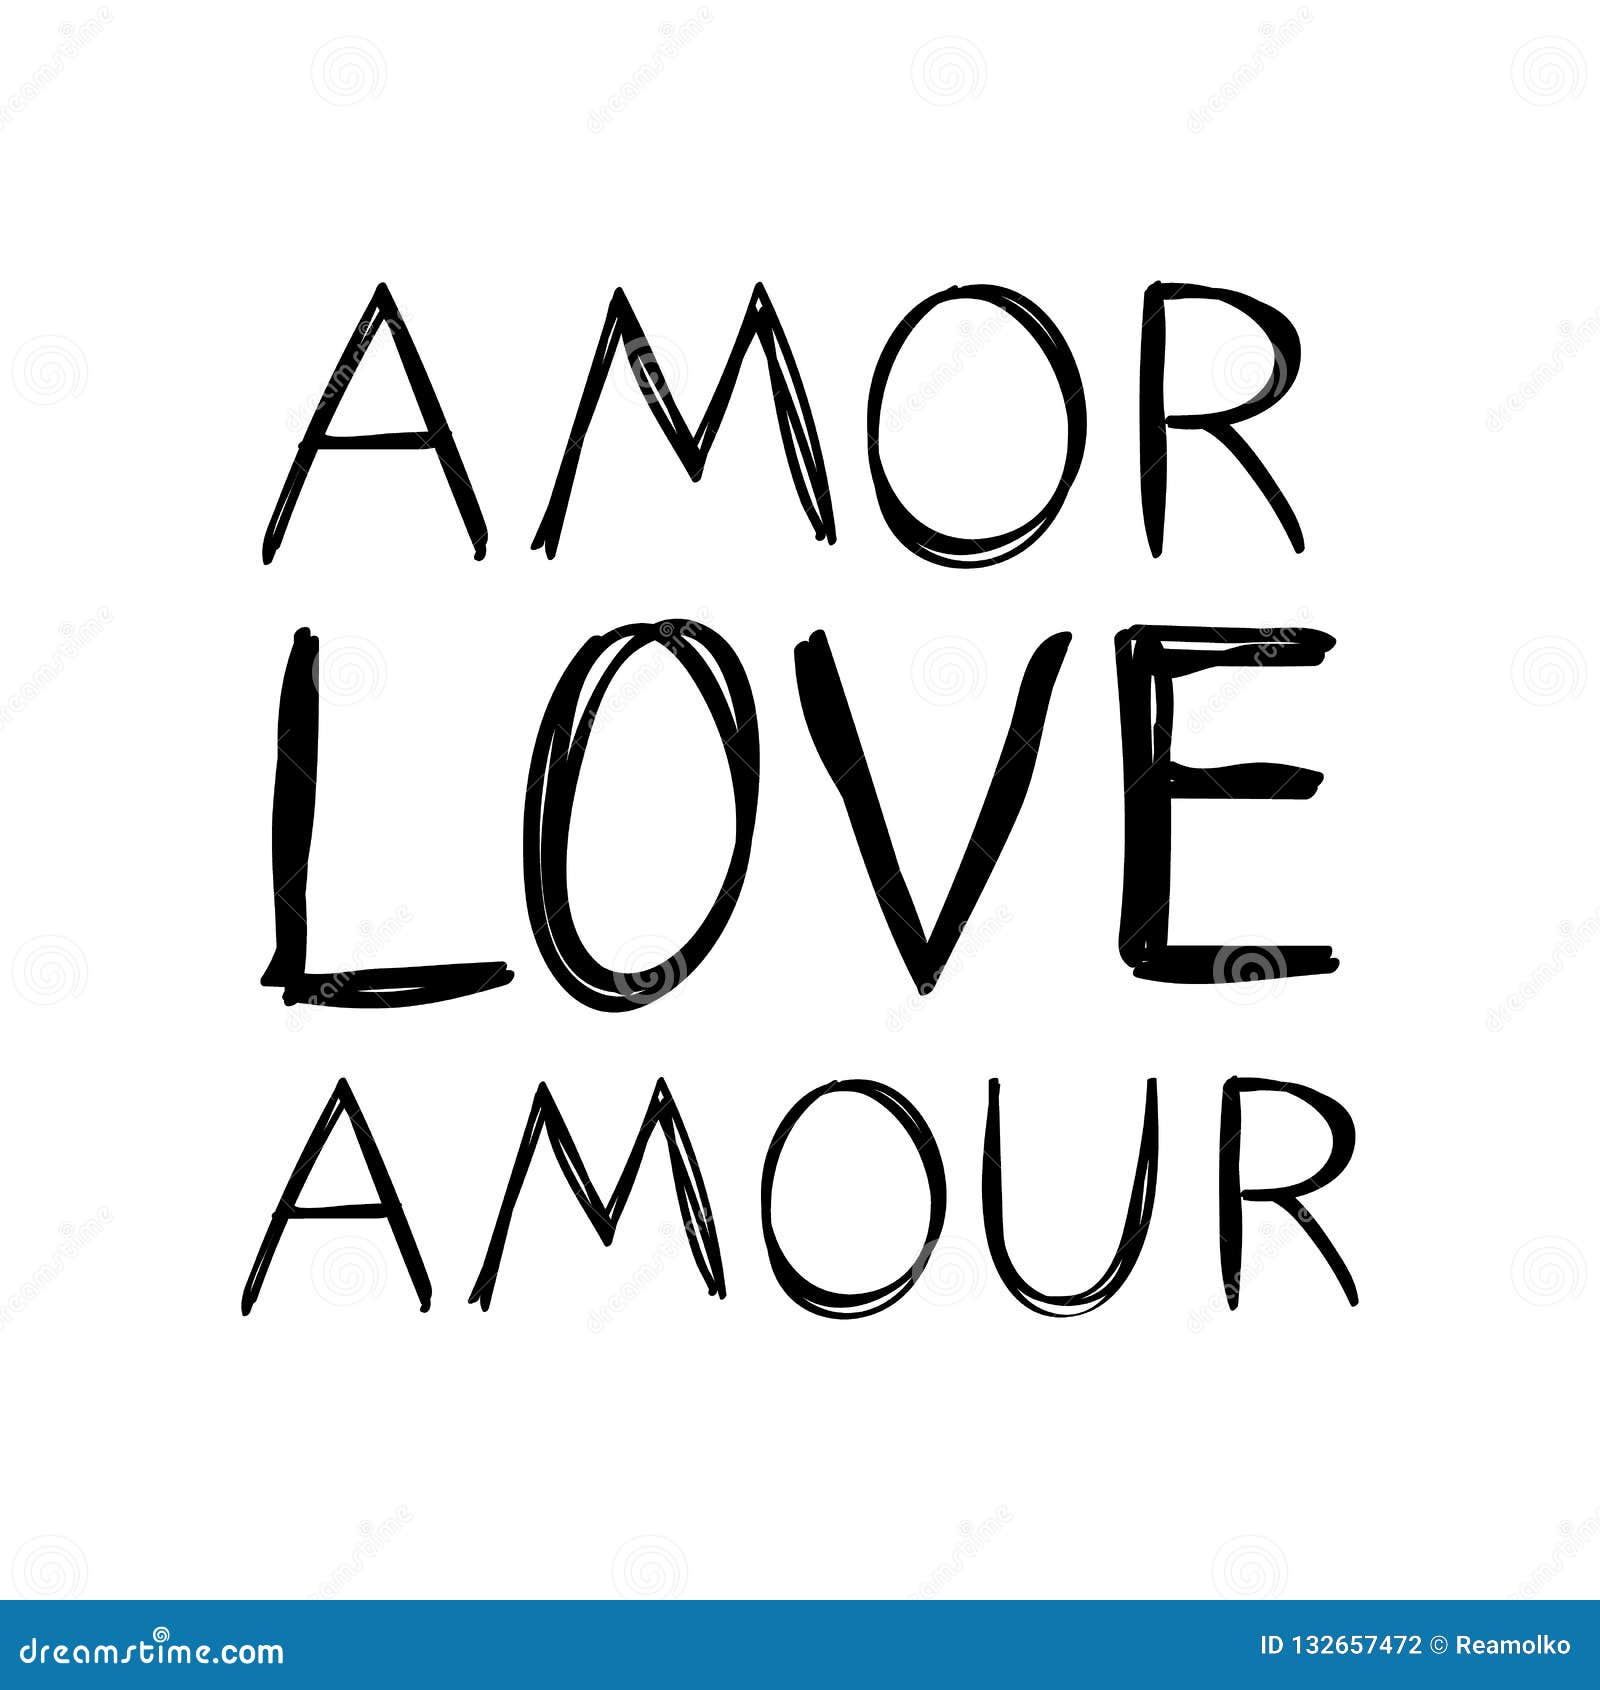 amor, love, amoure message for valentine`s day s.